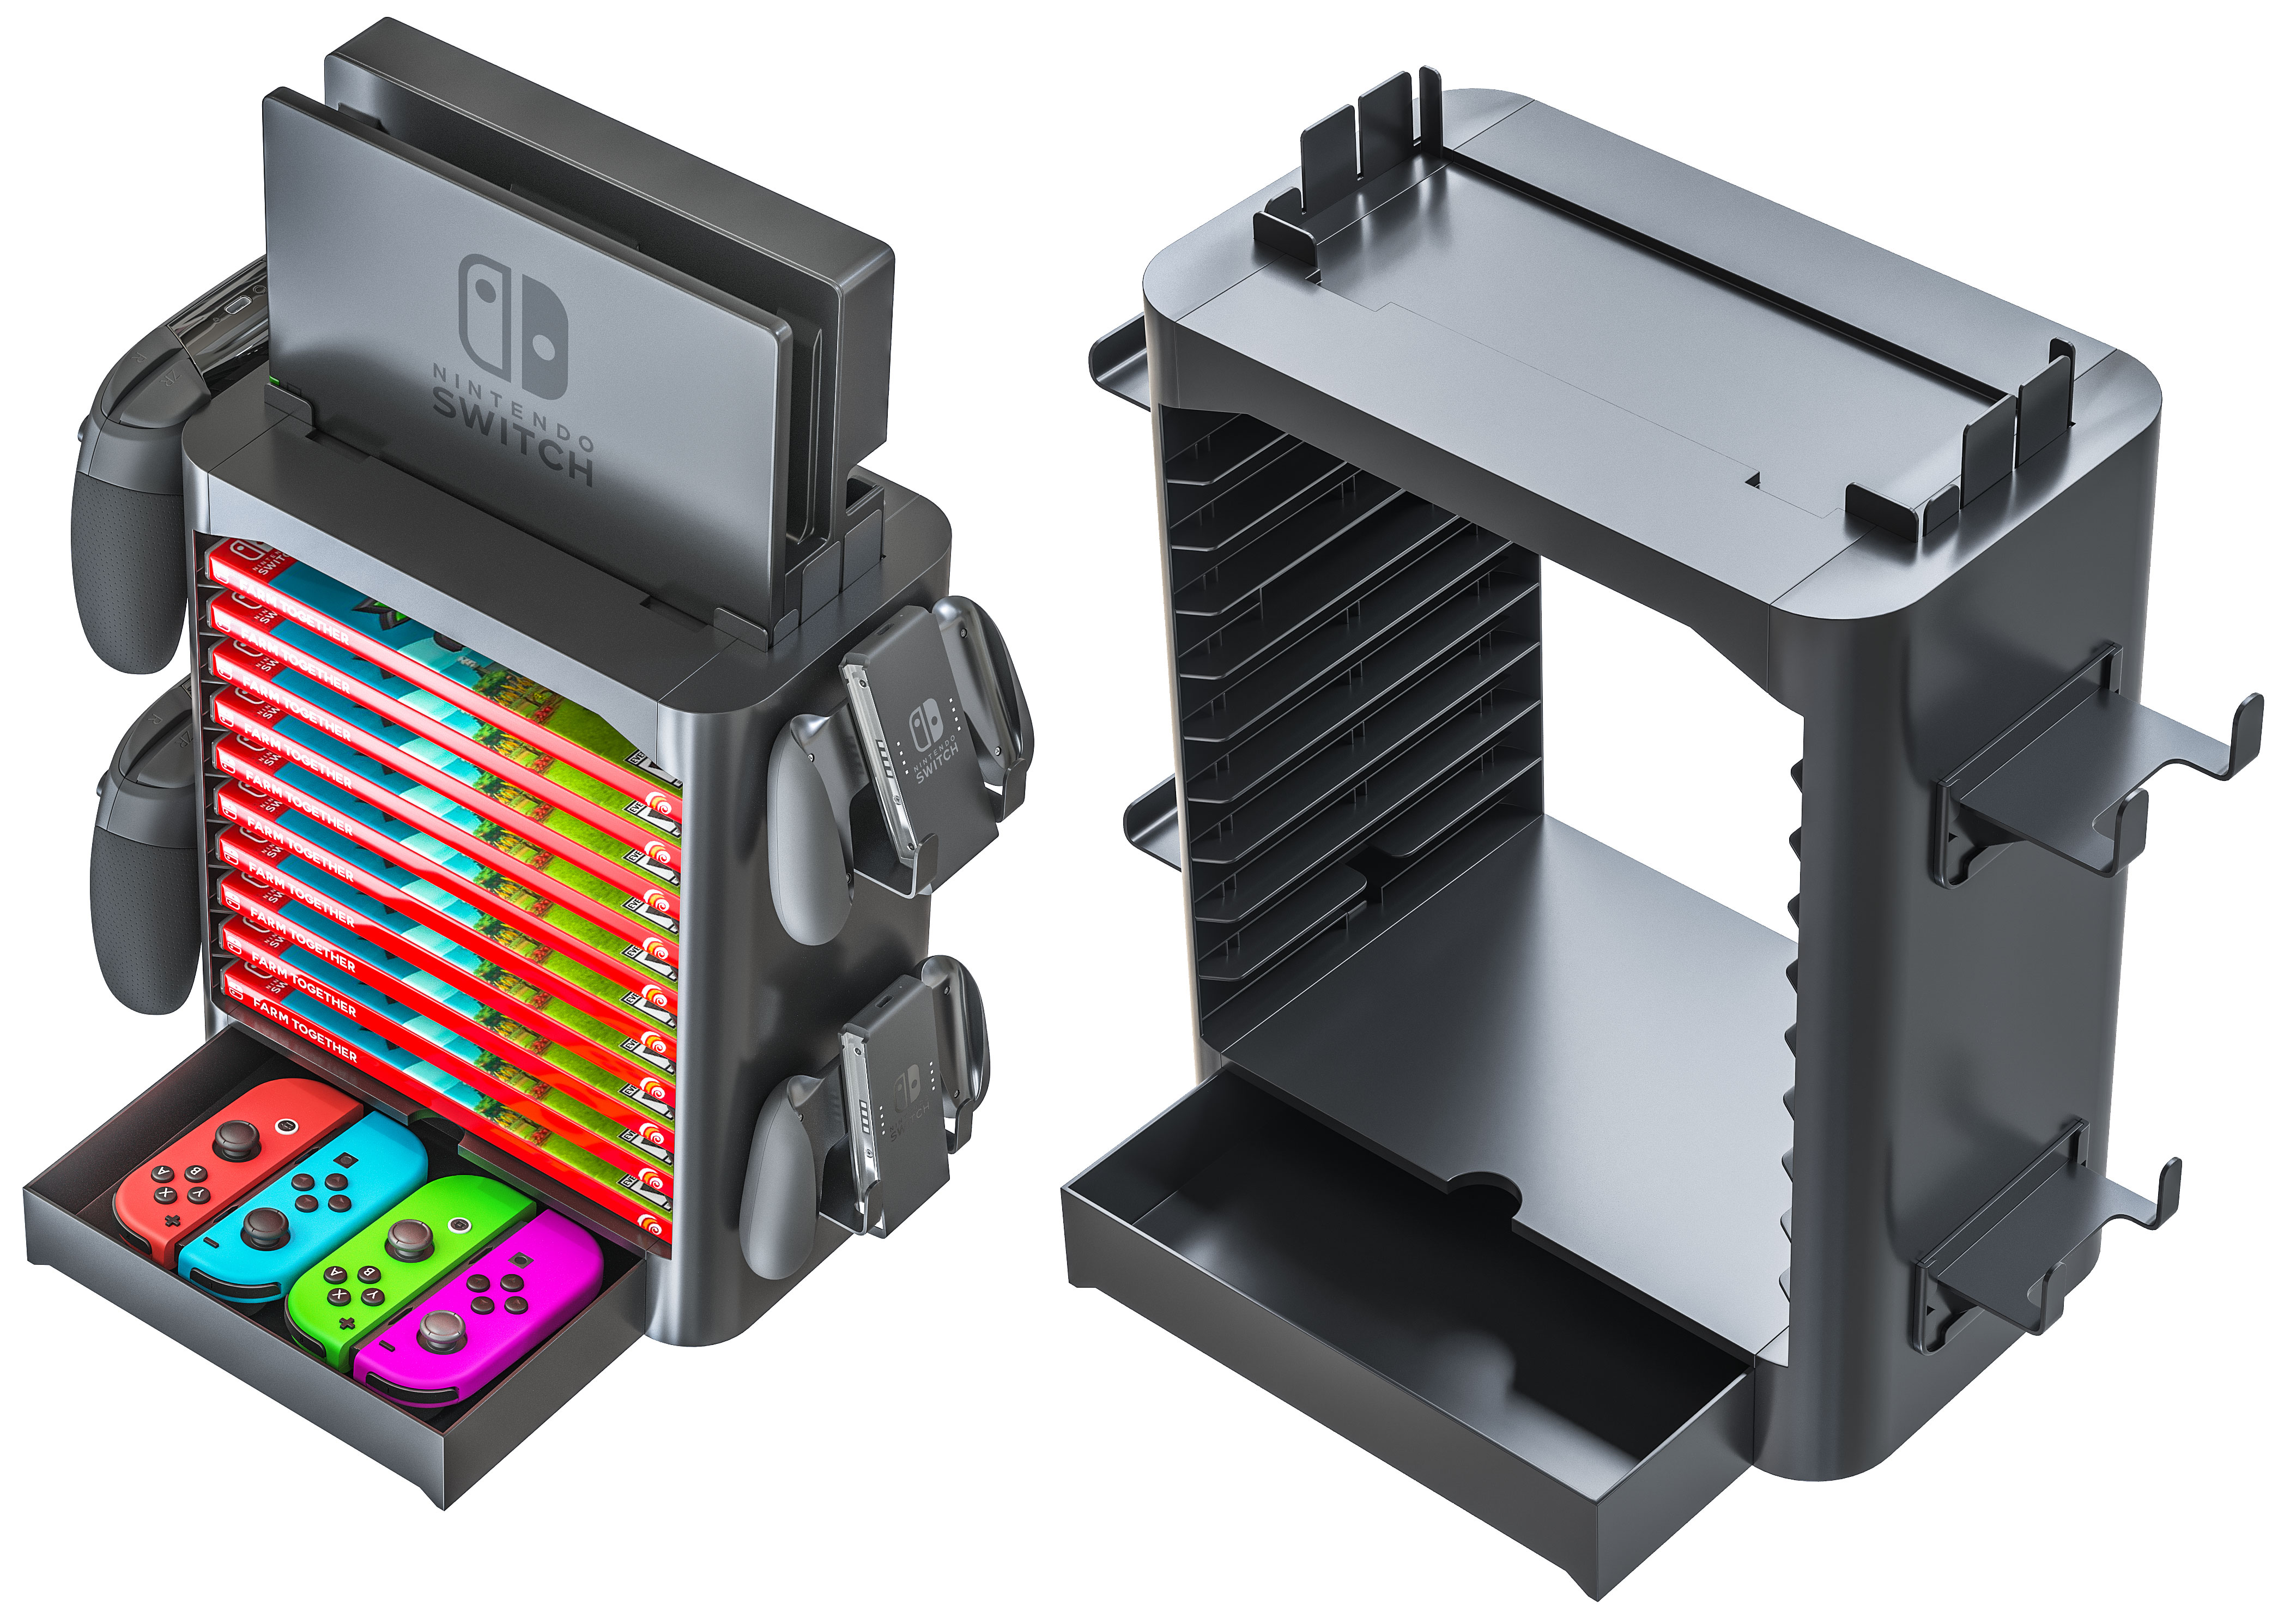 Skywin Game Storage Tower for Nintendo 